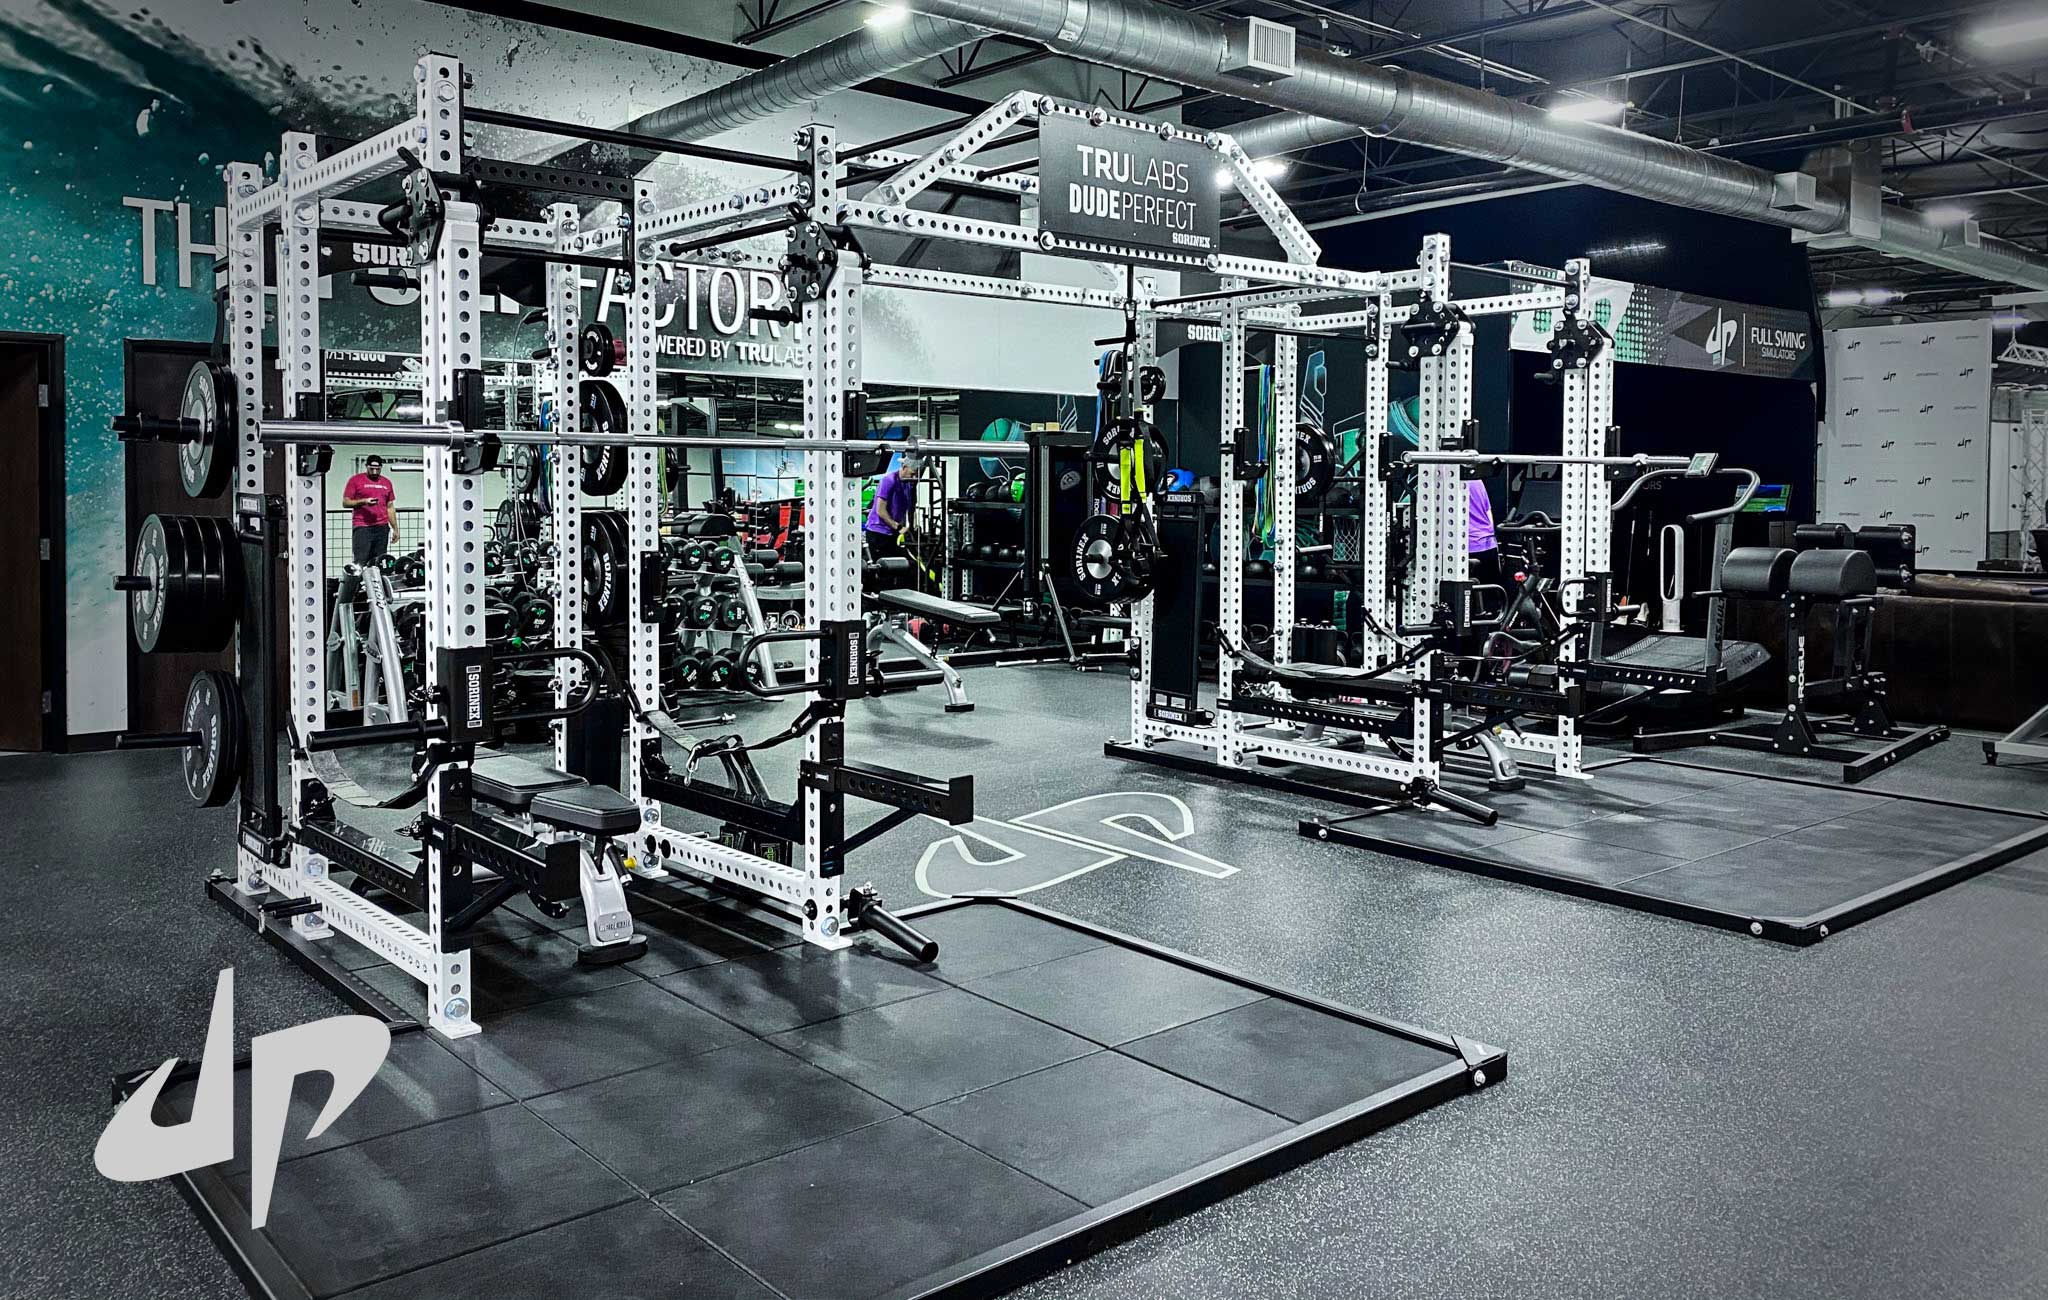 Private Strength Training Facilities